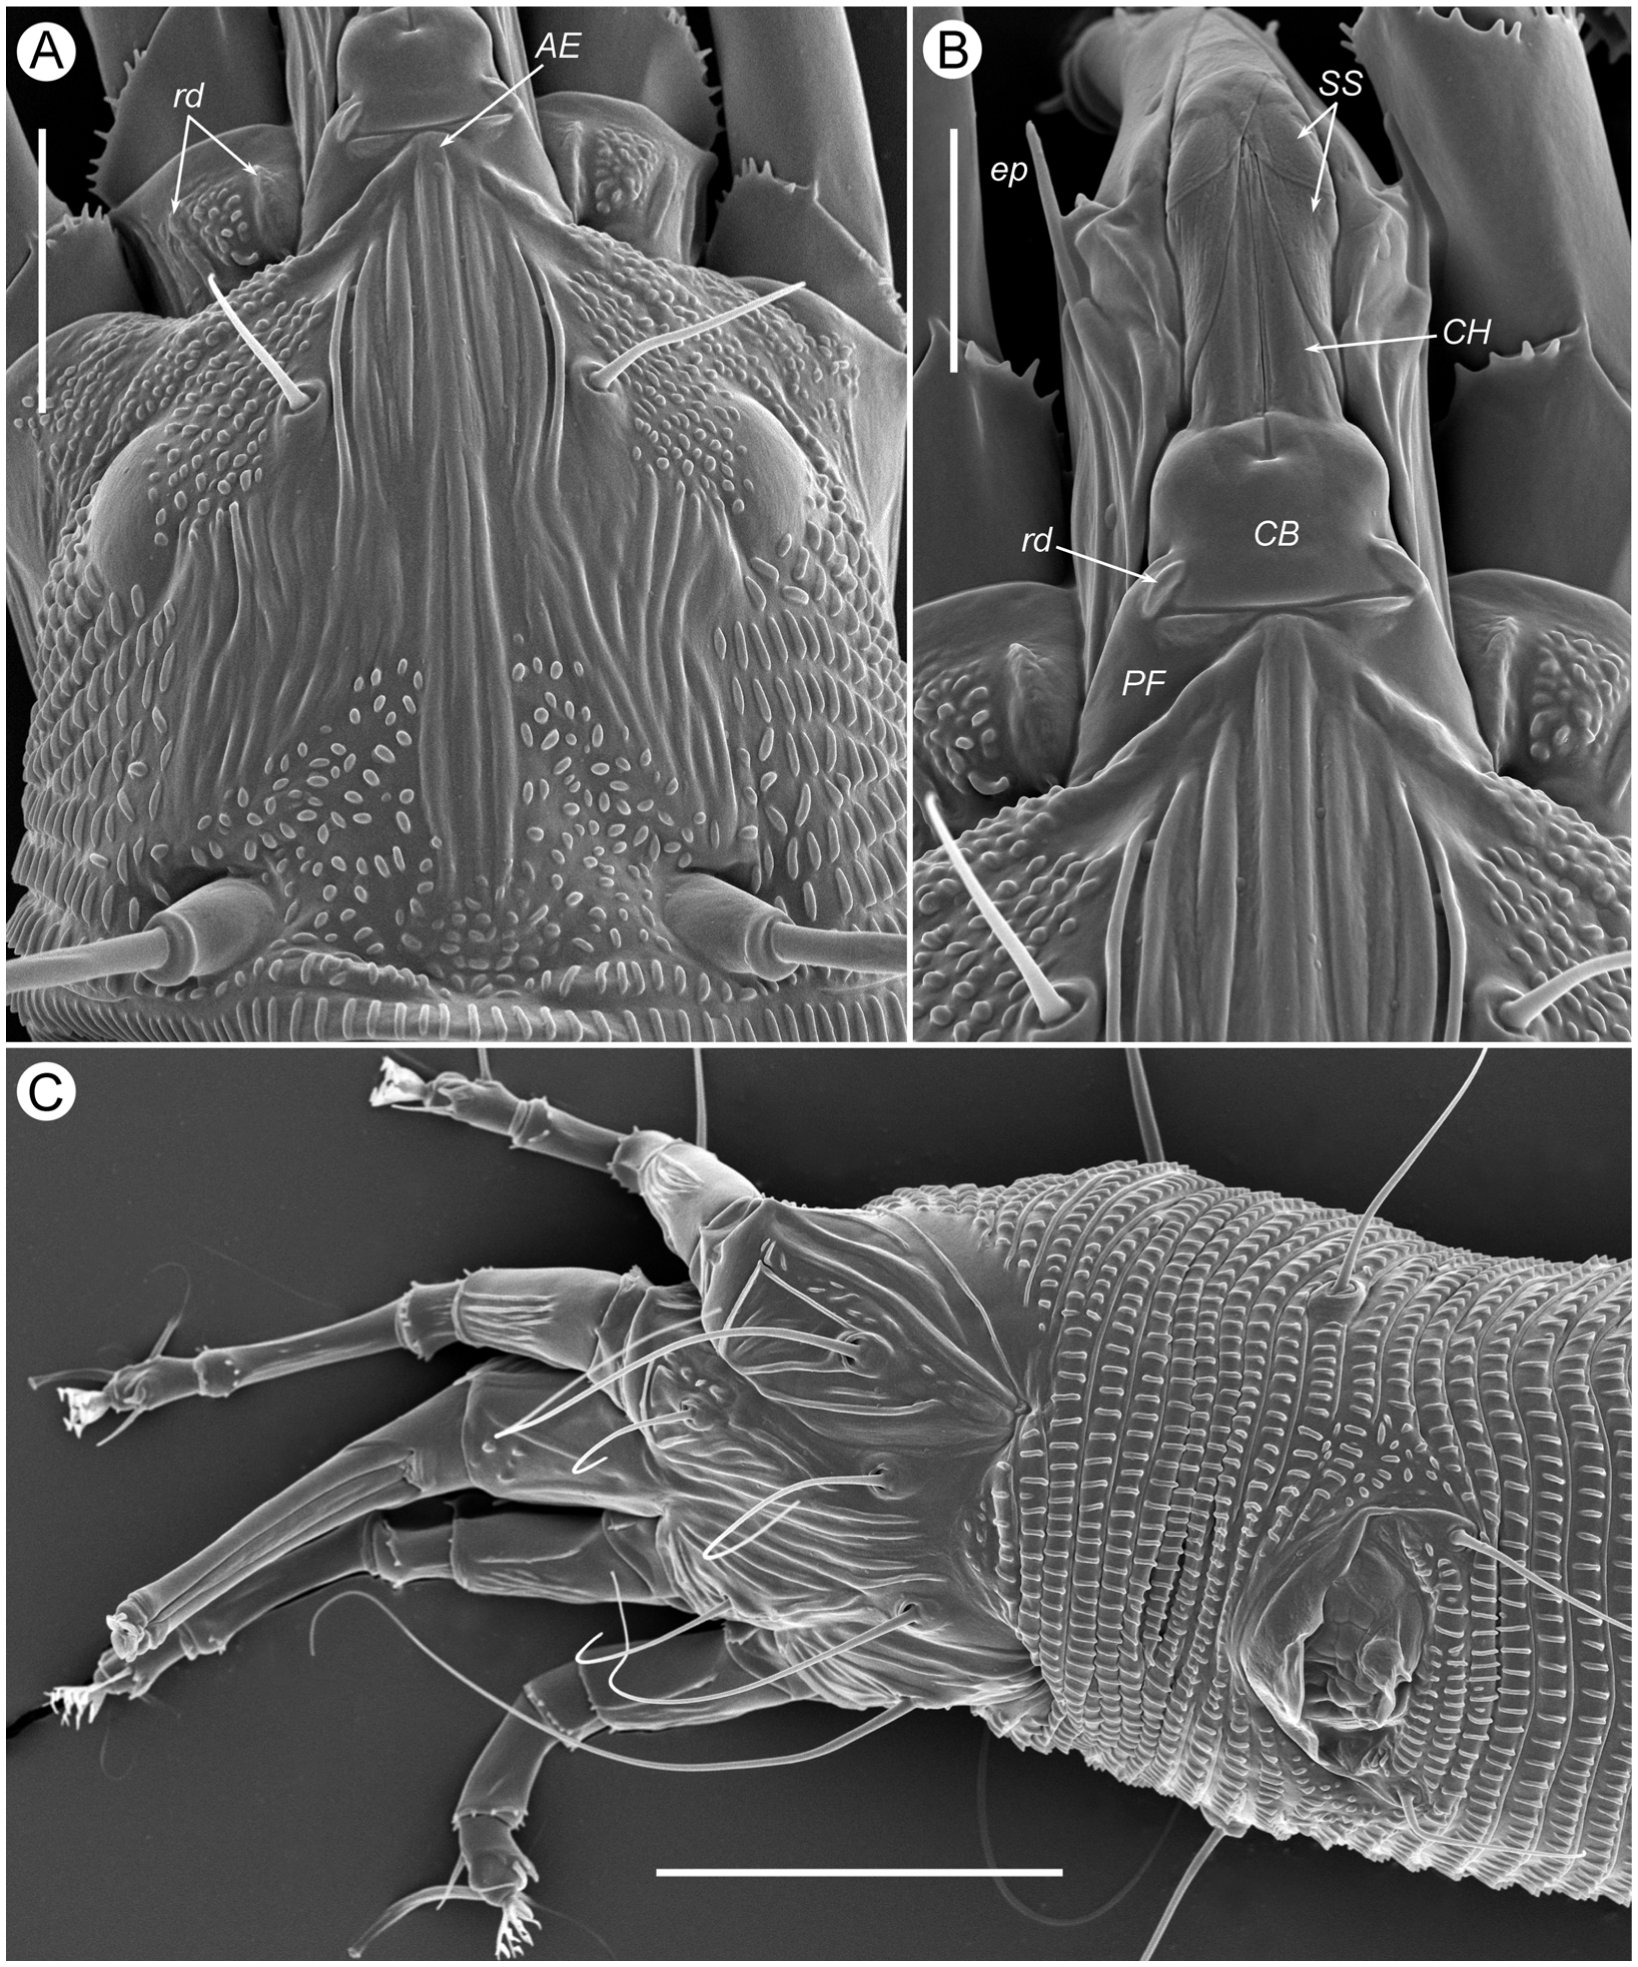 Supplementary Description Of Novophytoptus Stipae Keifer 1962 Acariformes Eriophyoidea With Lt Sem Observation On Mites From Putatively Conspecific Populations Cryptic Speciation Or Polyphagy Of Novophytoptines On Phylogenetically Remote Hosts